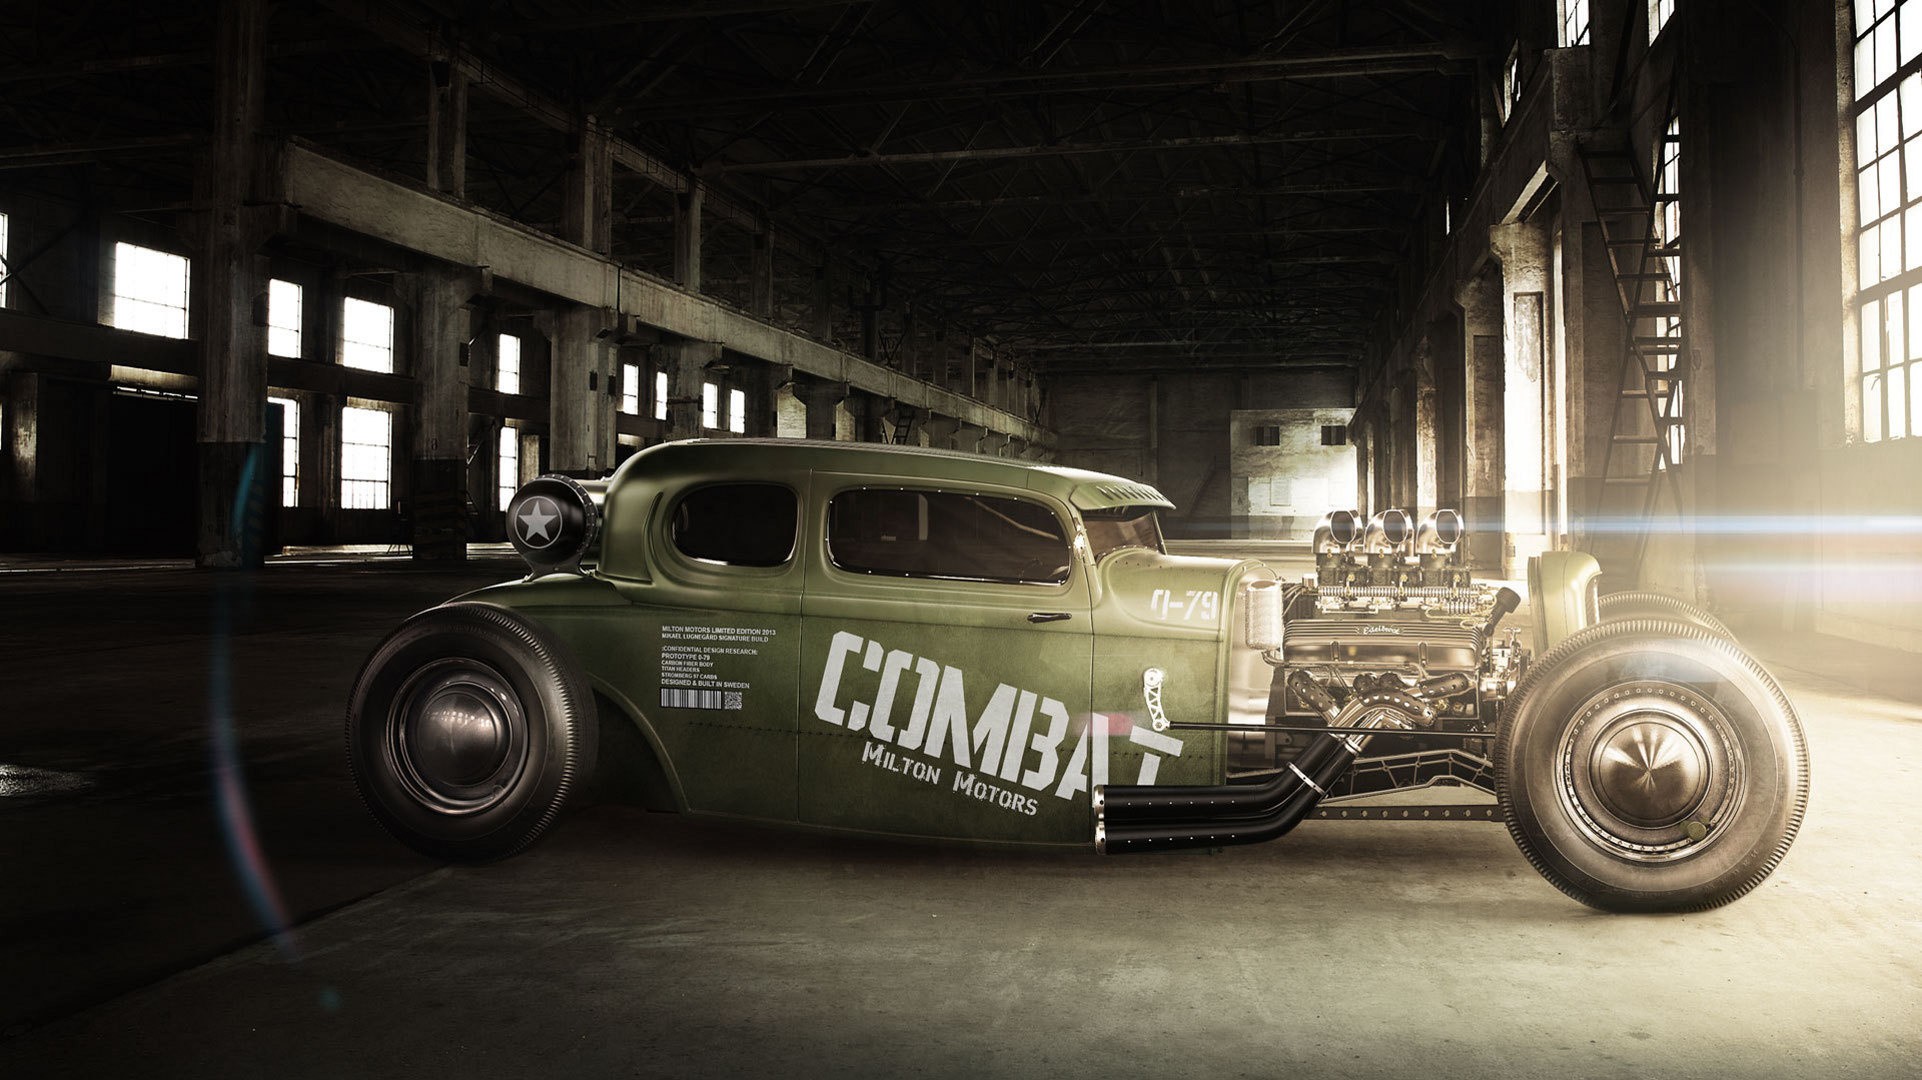 Car Hot Rod Modified Green Cars Muscle Cars 1922x1080